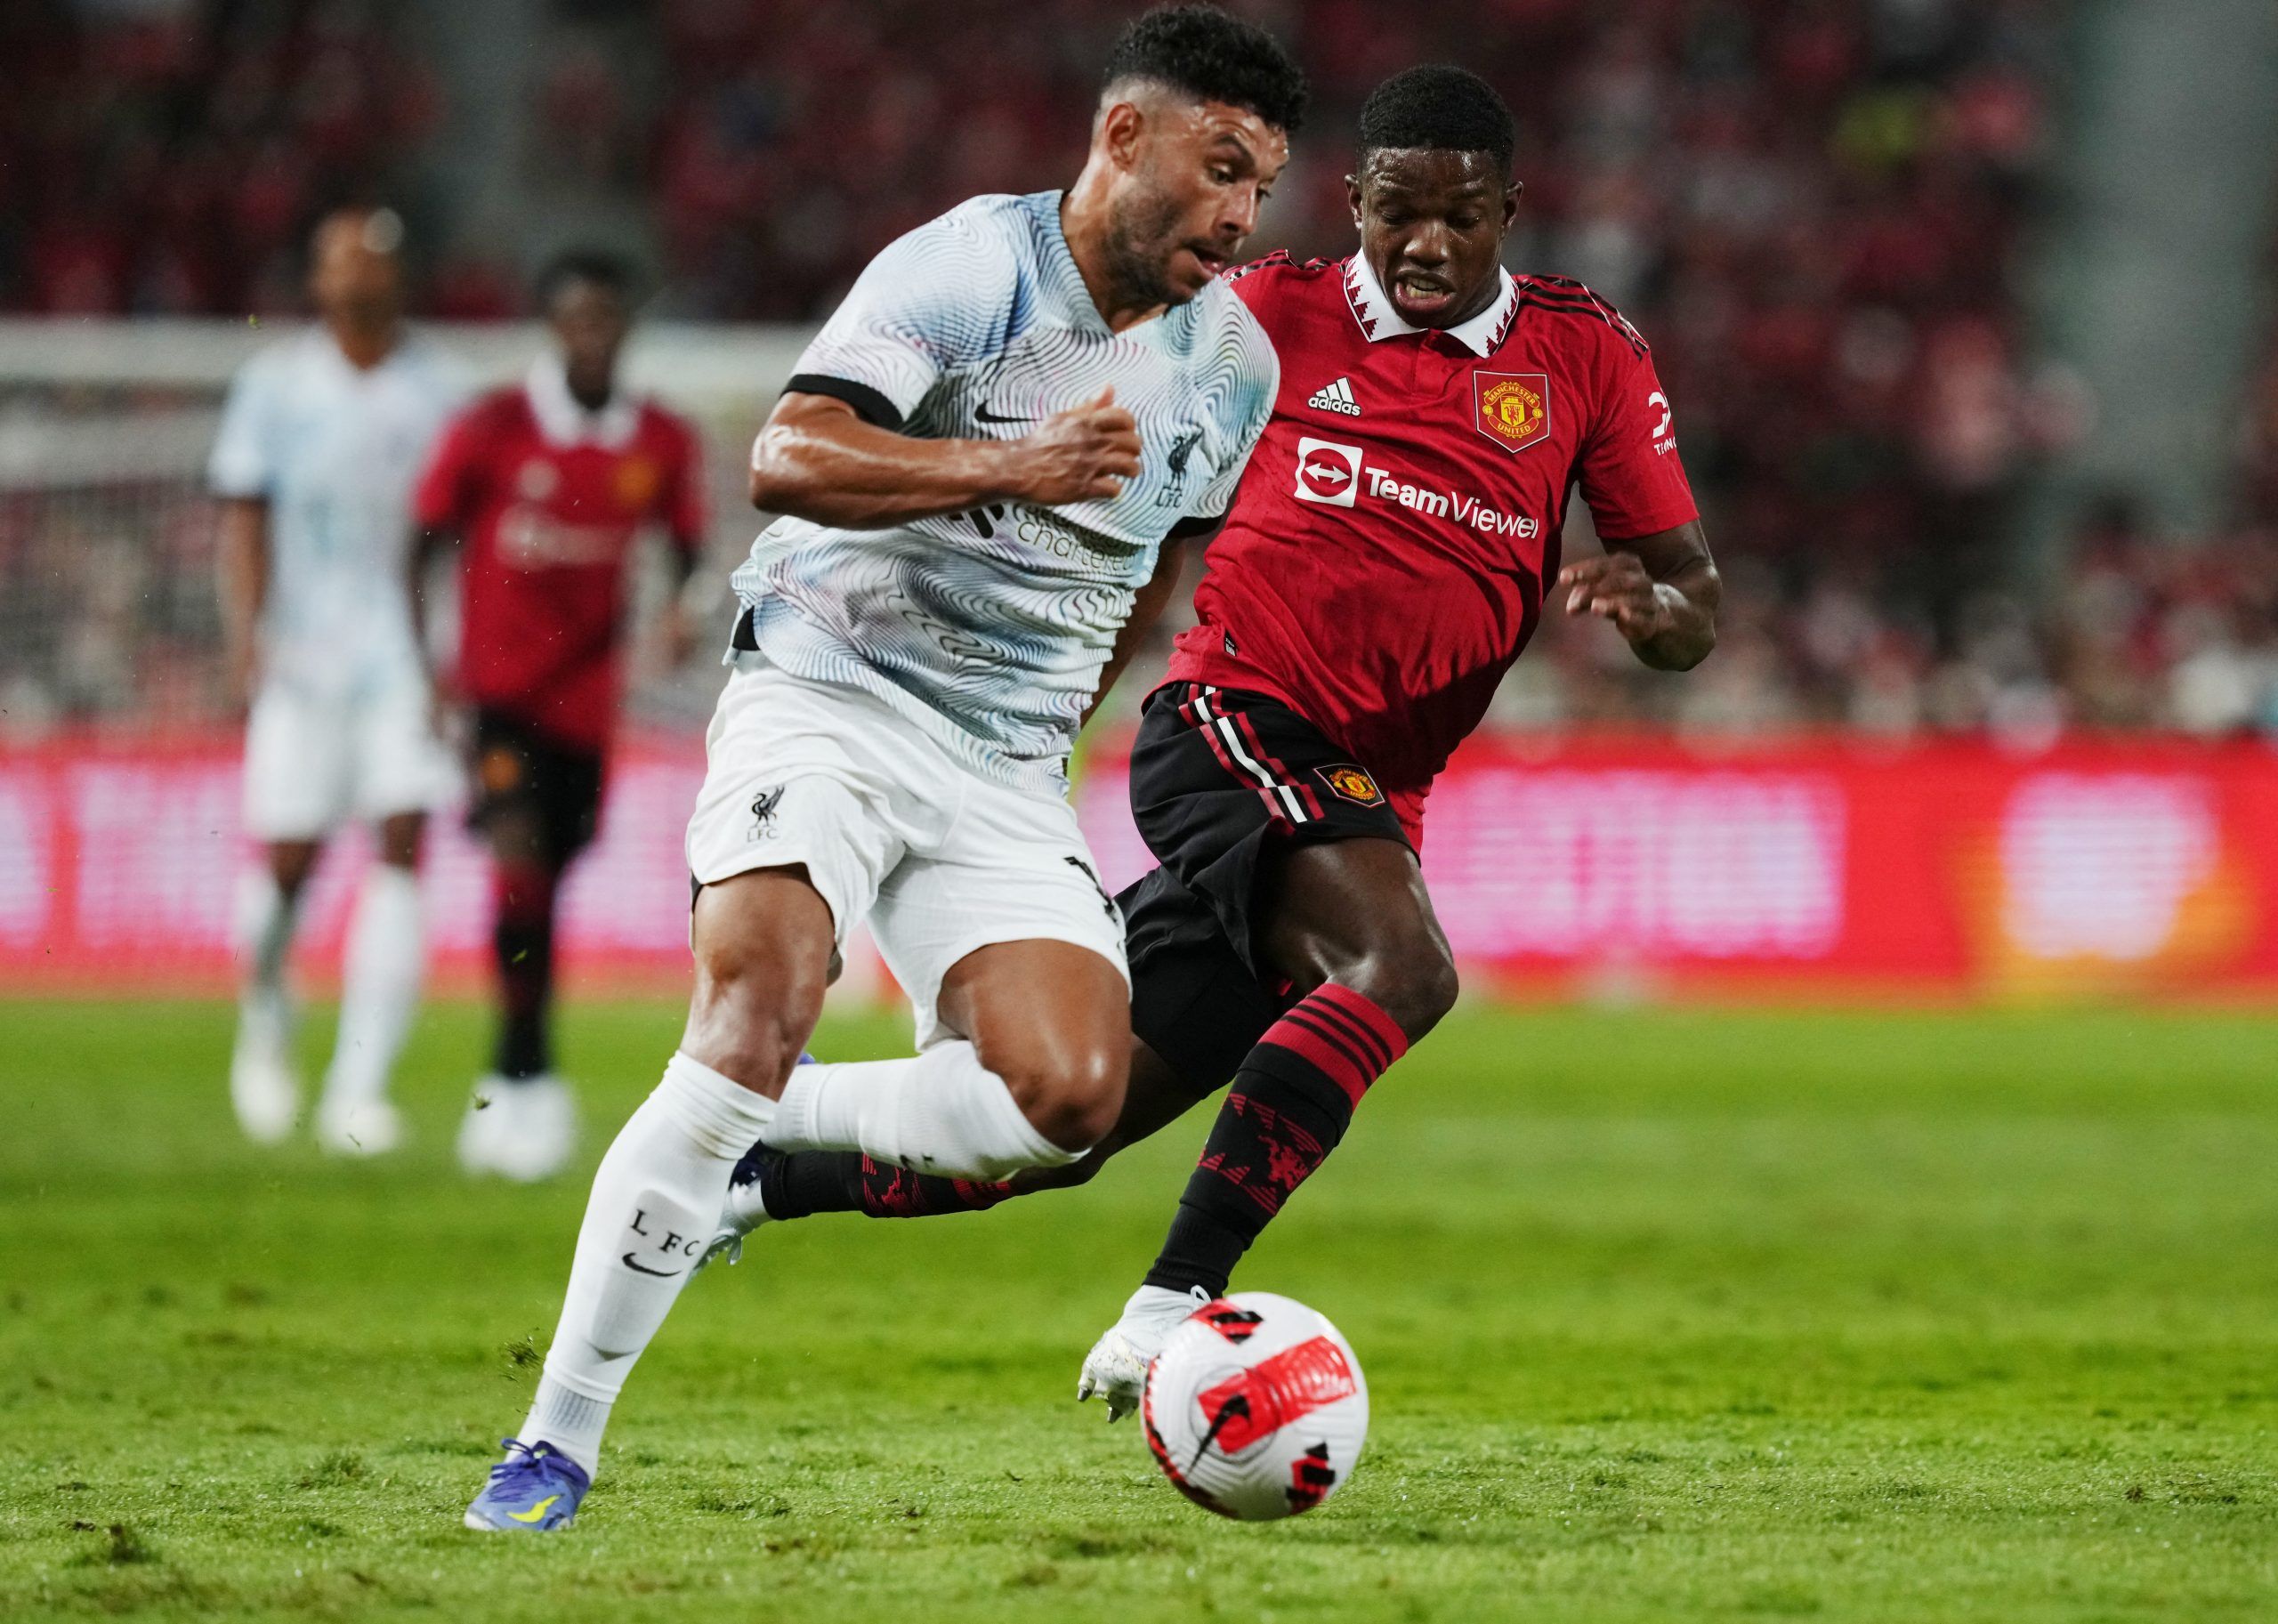 Soccer Football - Pre Season Friendly - Manchester United v Liverpool - Rajamangala National Stadium, Bangkok, Thailand - July 12, 2022 Liverpool's Alex Oxlade-Chamberlain in action with Manchester United's Tyrell Malacia REUTERS/Athit Perawongmetha